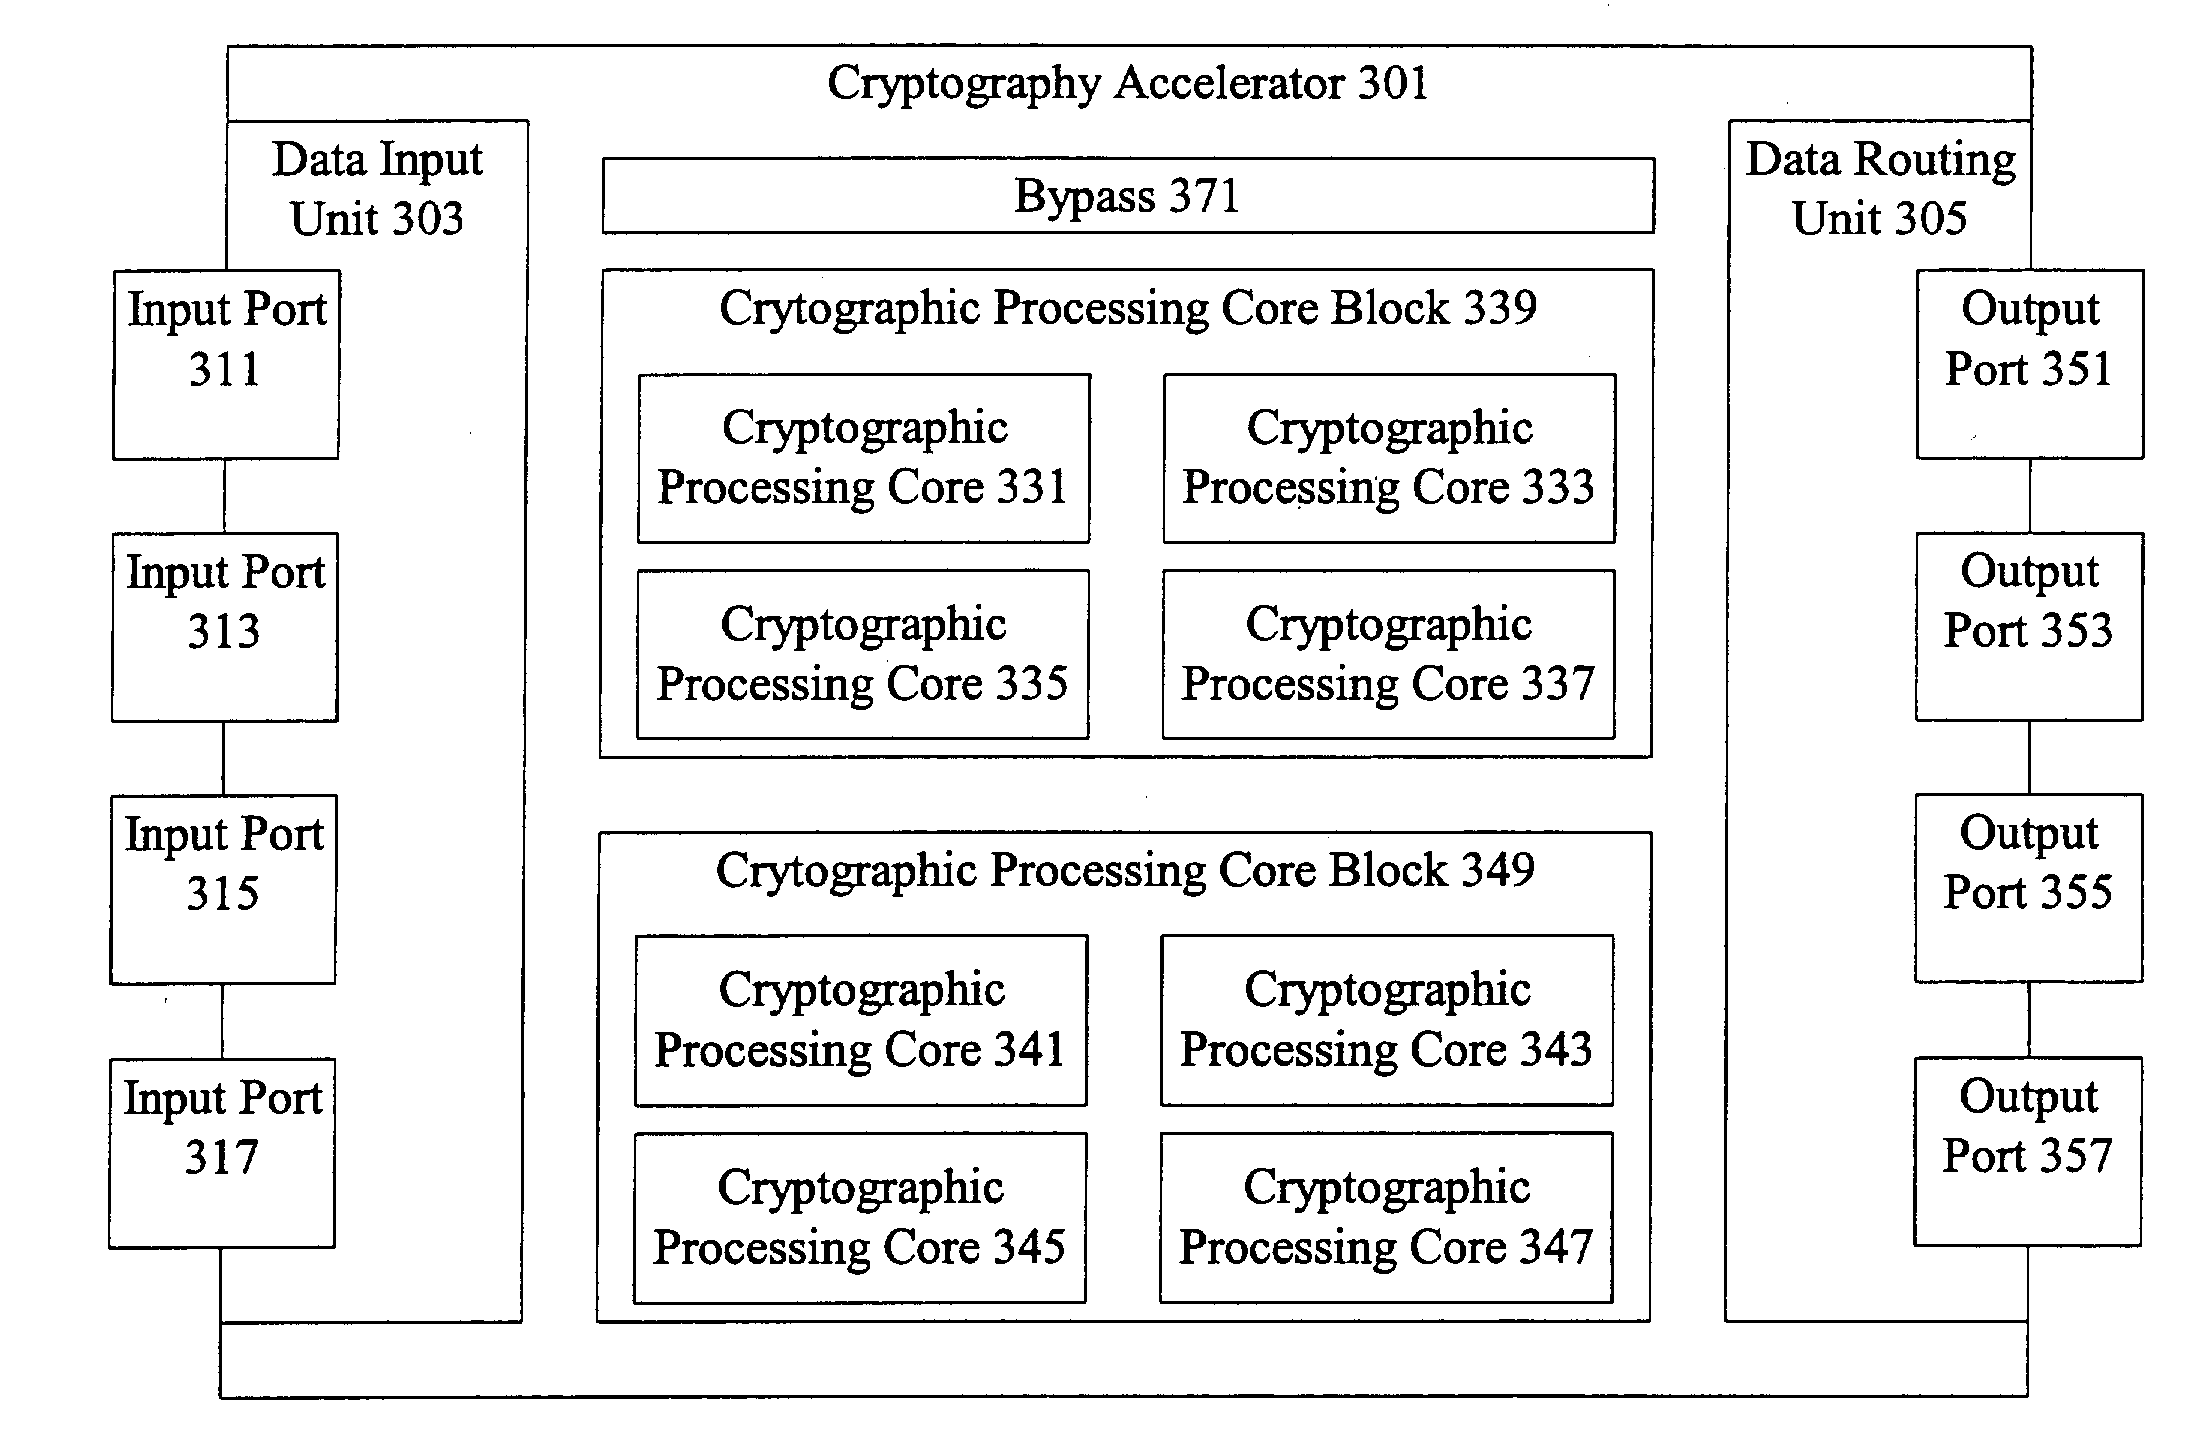 Cryptography accelerator data routing unit